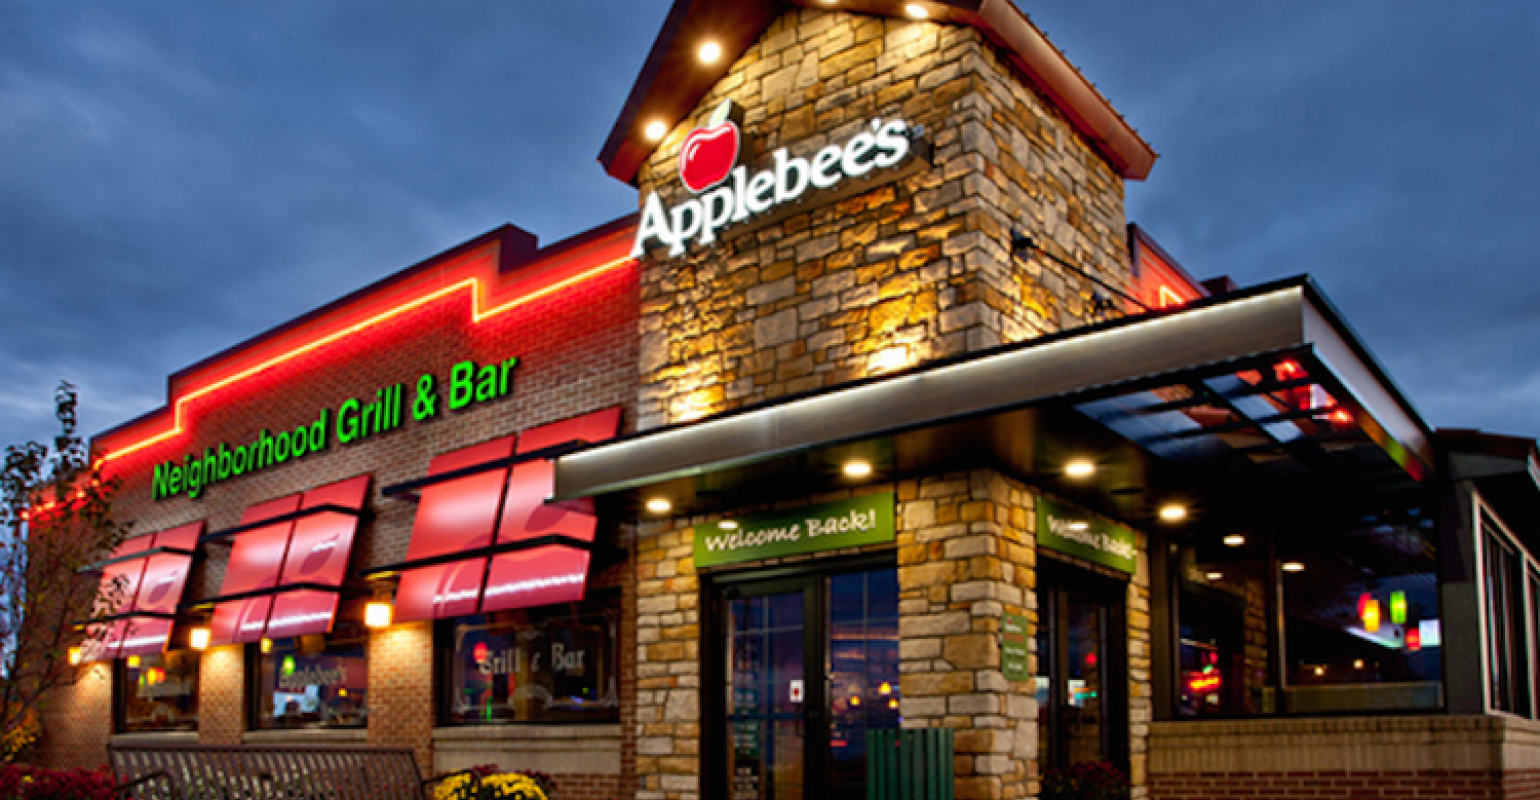 Franchise deal signed to launch Applebee's, IHOP restaurants in the UAE